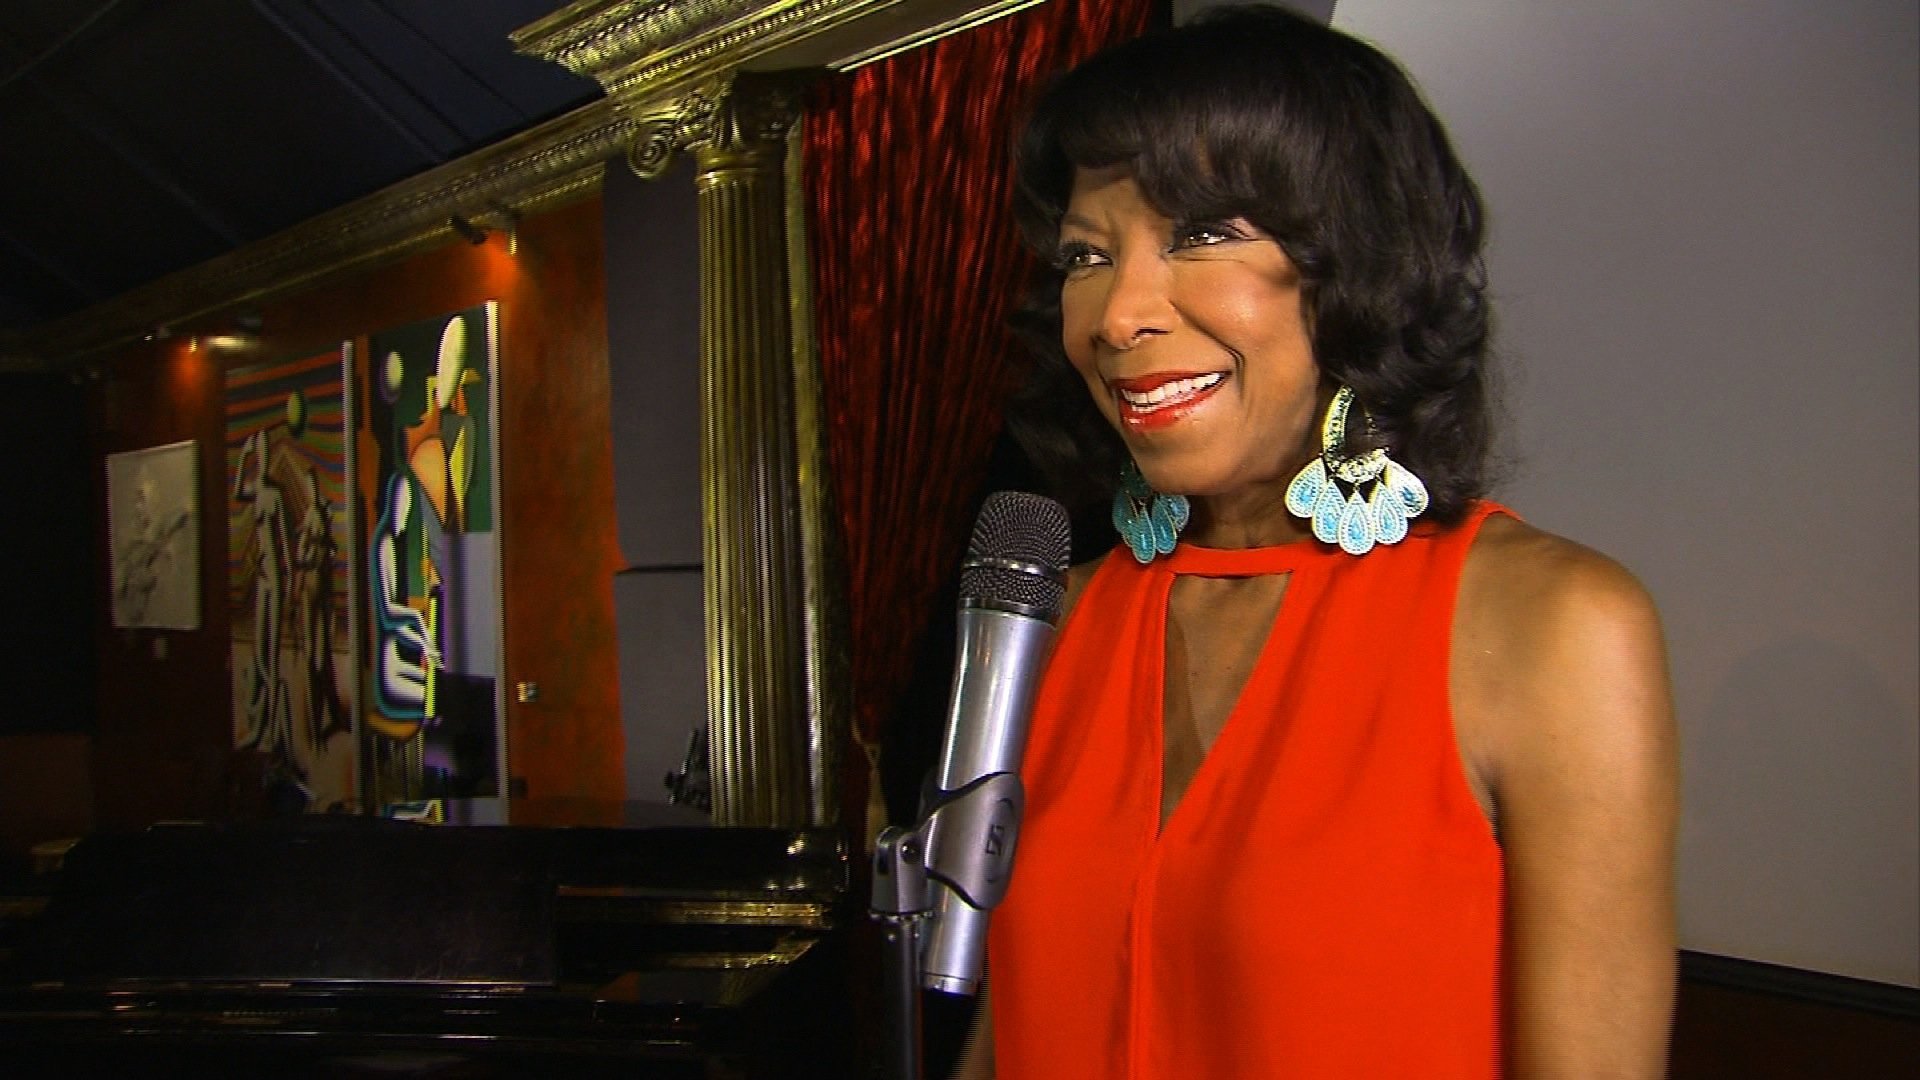 (FILE) Singer Natalie Cole died December 31, 2015, according to her publicist Maureen O'Connor. Cole was 65.